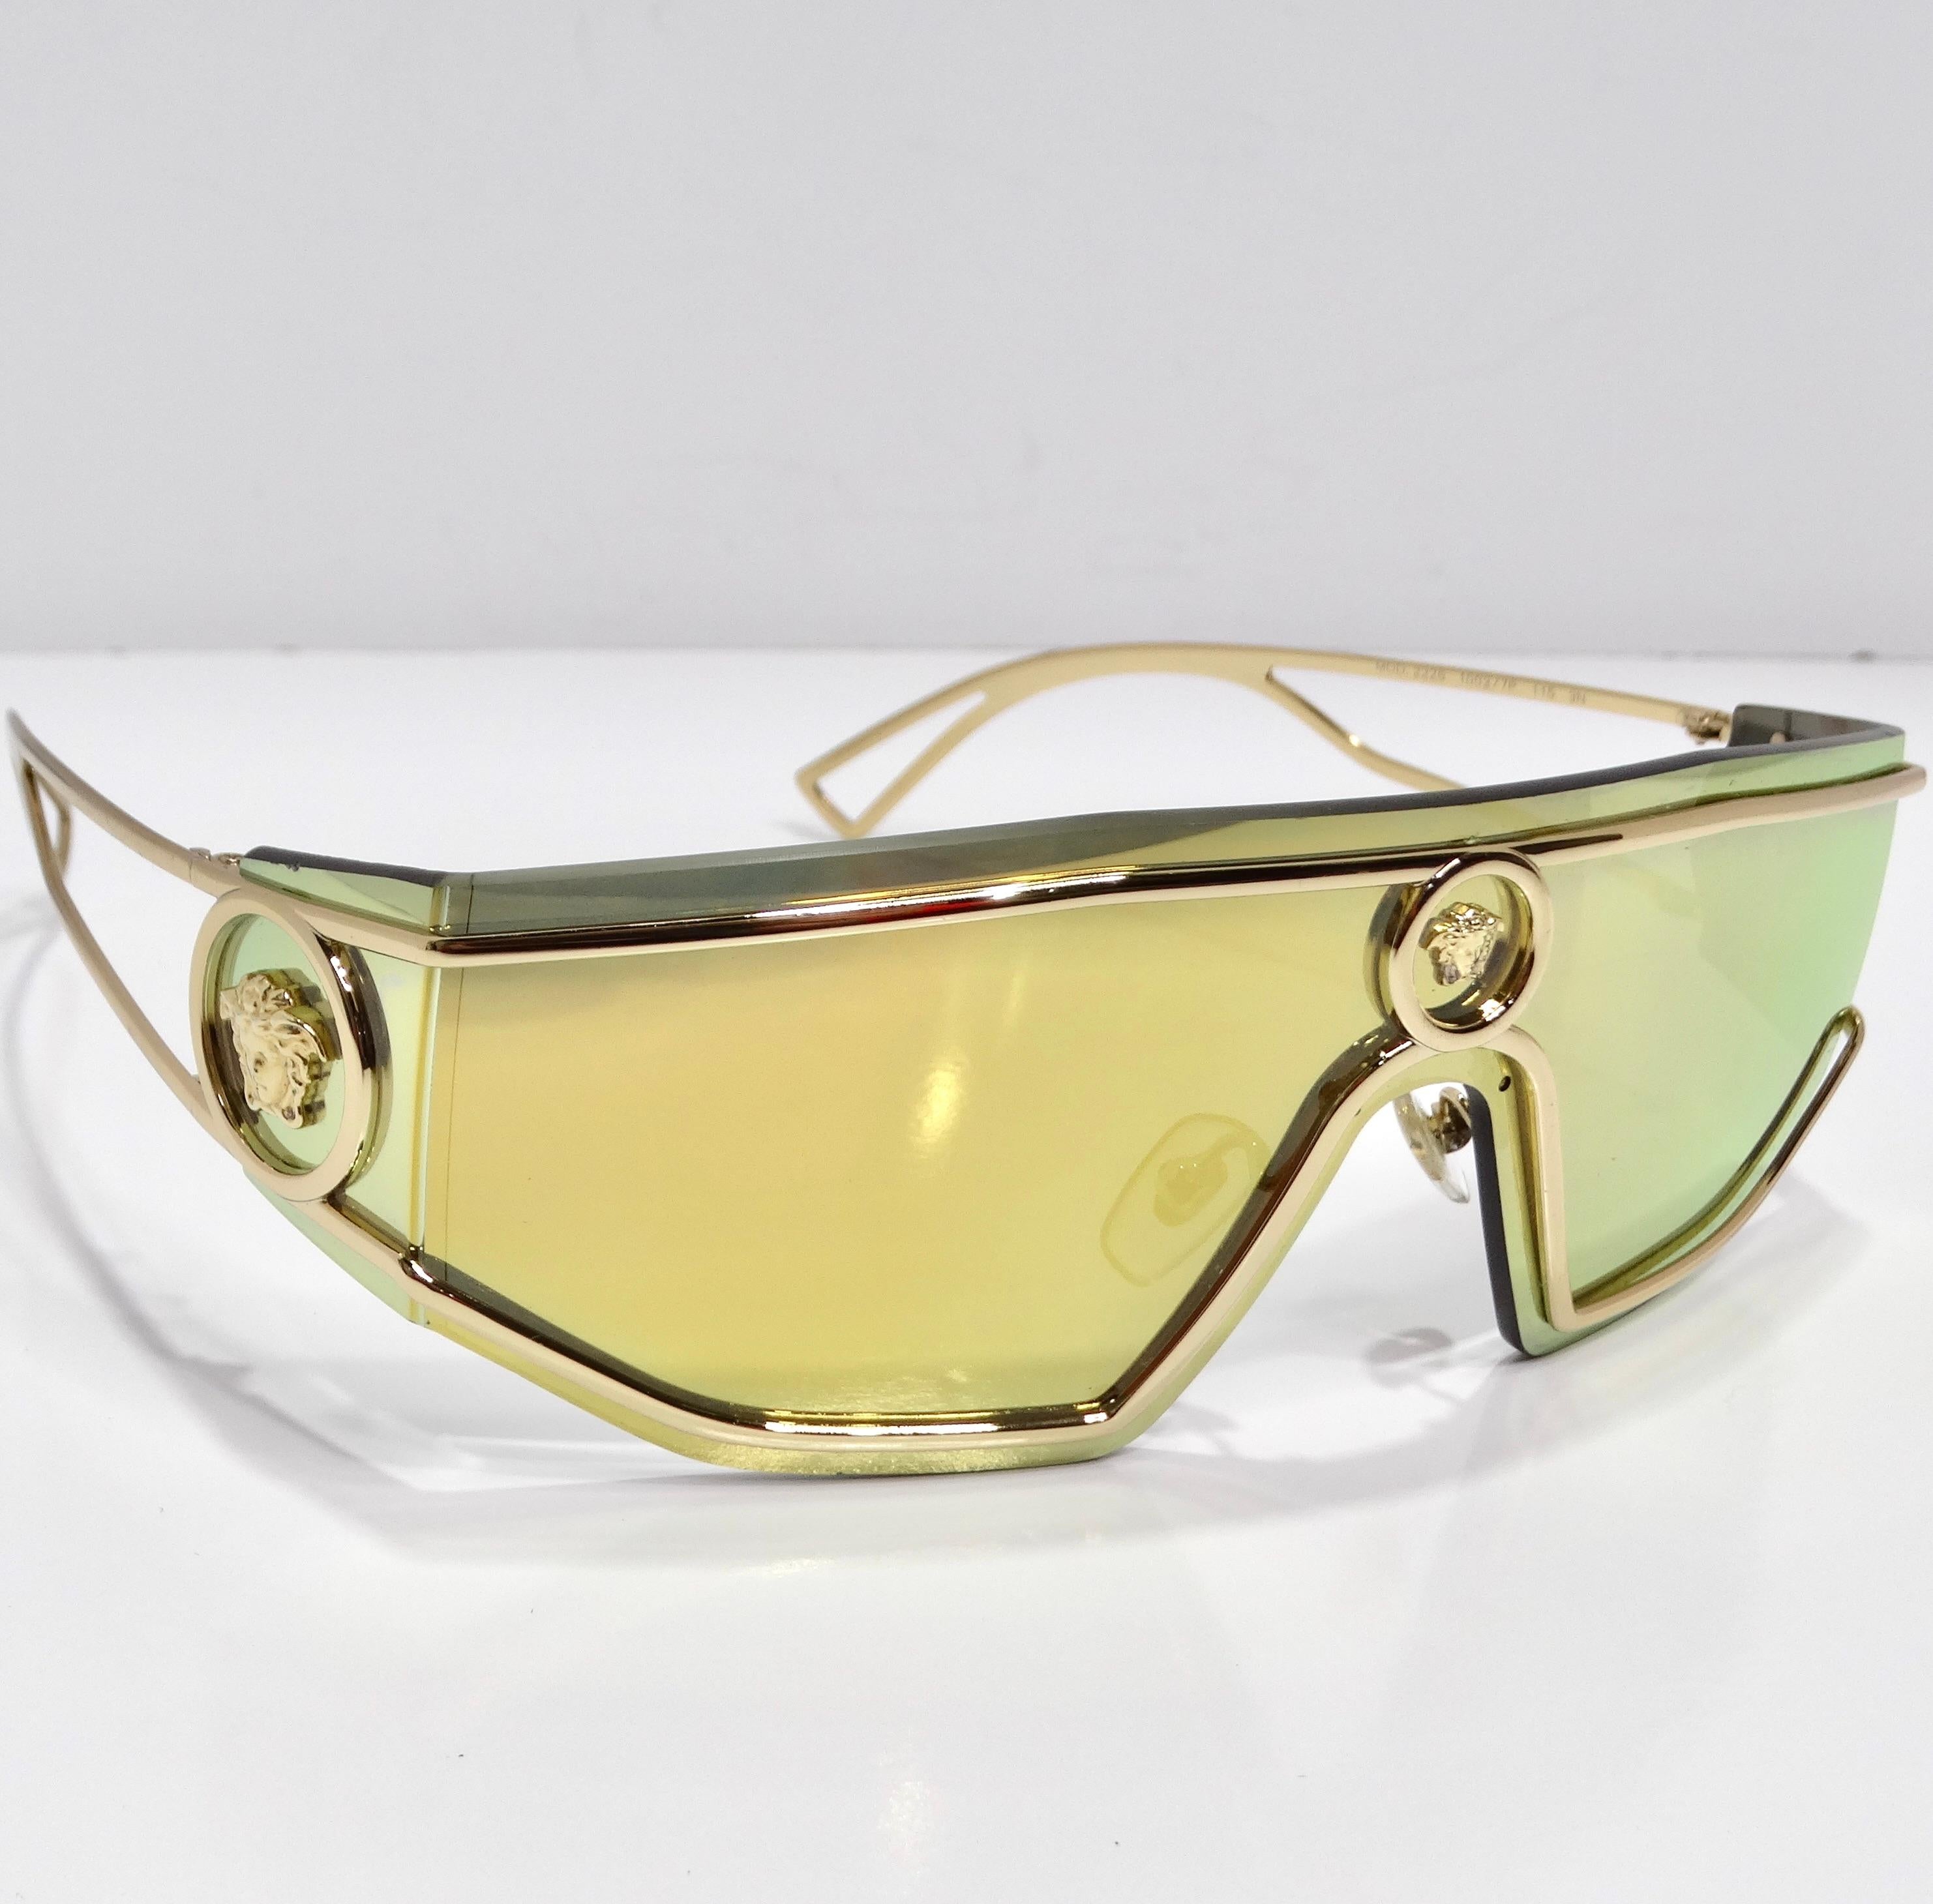 Versace Medusa Gold Tone Mirrored Shield Sunglasses In Good Condition For Sale In Scottsdale, AZ